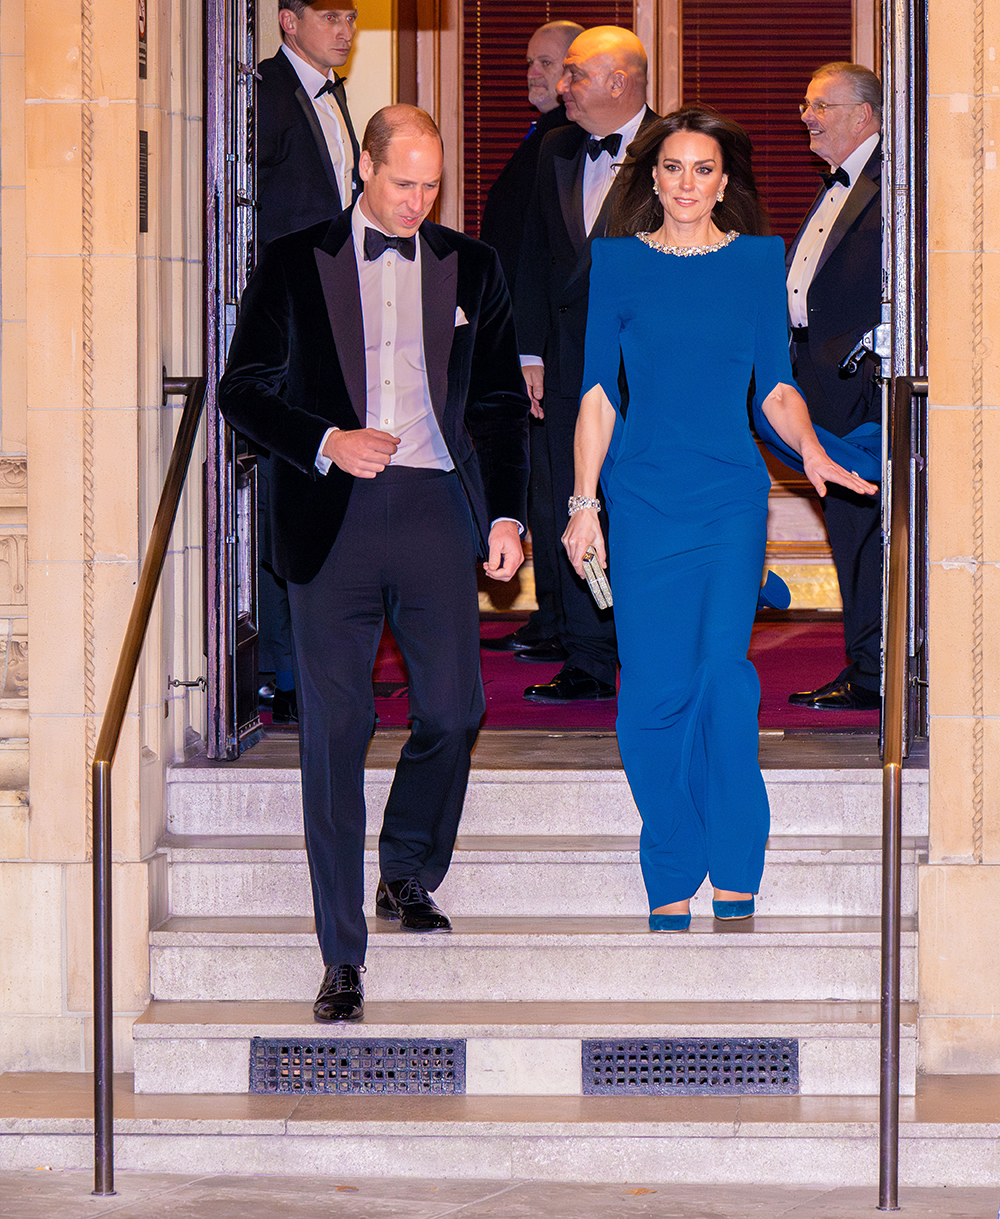 prince william and kate middleton walking down steps